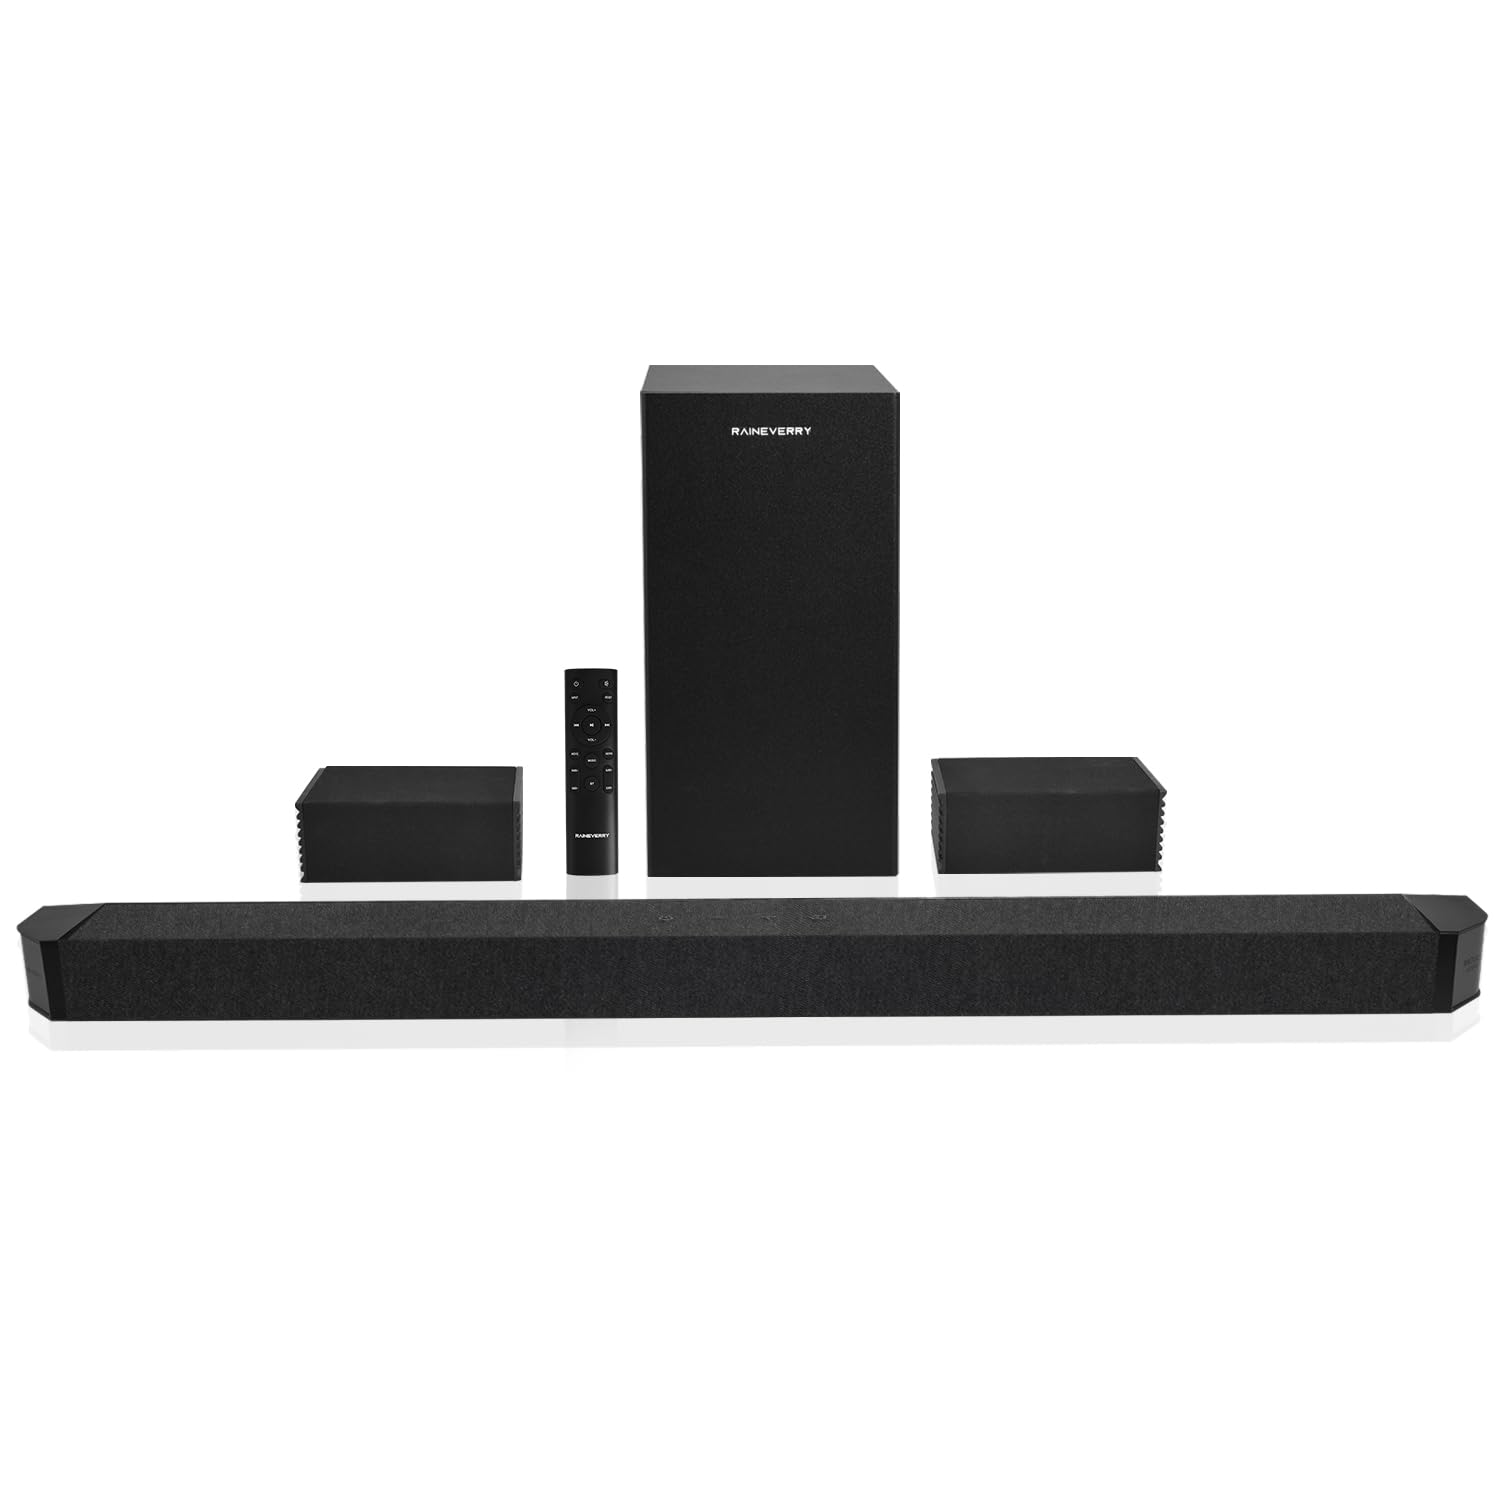 RAINEVERRY 5.1.2 Premium Sound Bar with Dolby Atmos, Surround Sound System for TV, Wireless Subwoofer, Home Theater Surround Sound System, Bluetooth 5.1, Work with 4K & HD TVs| HDMI & Optical